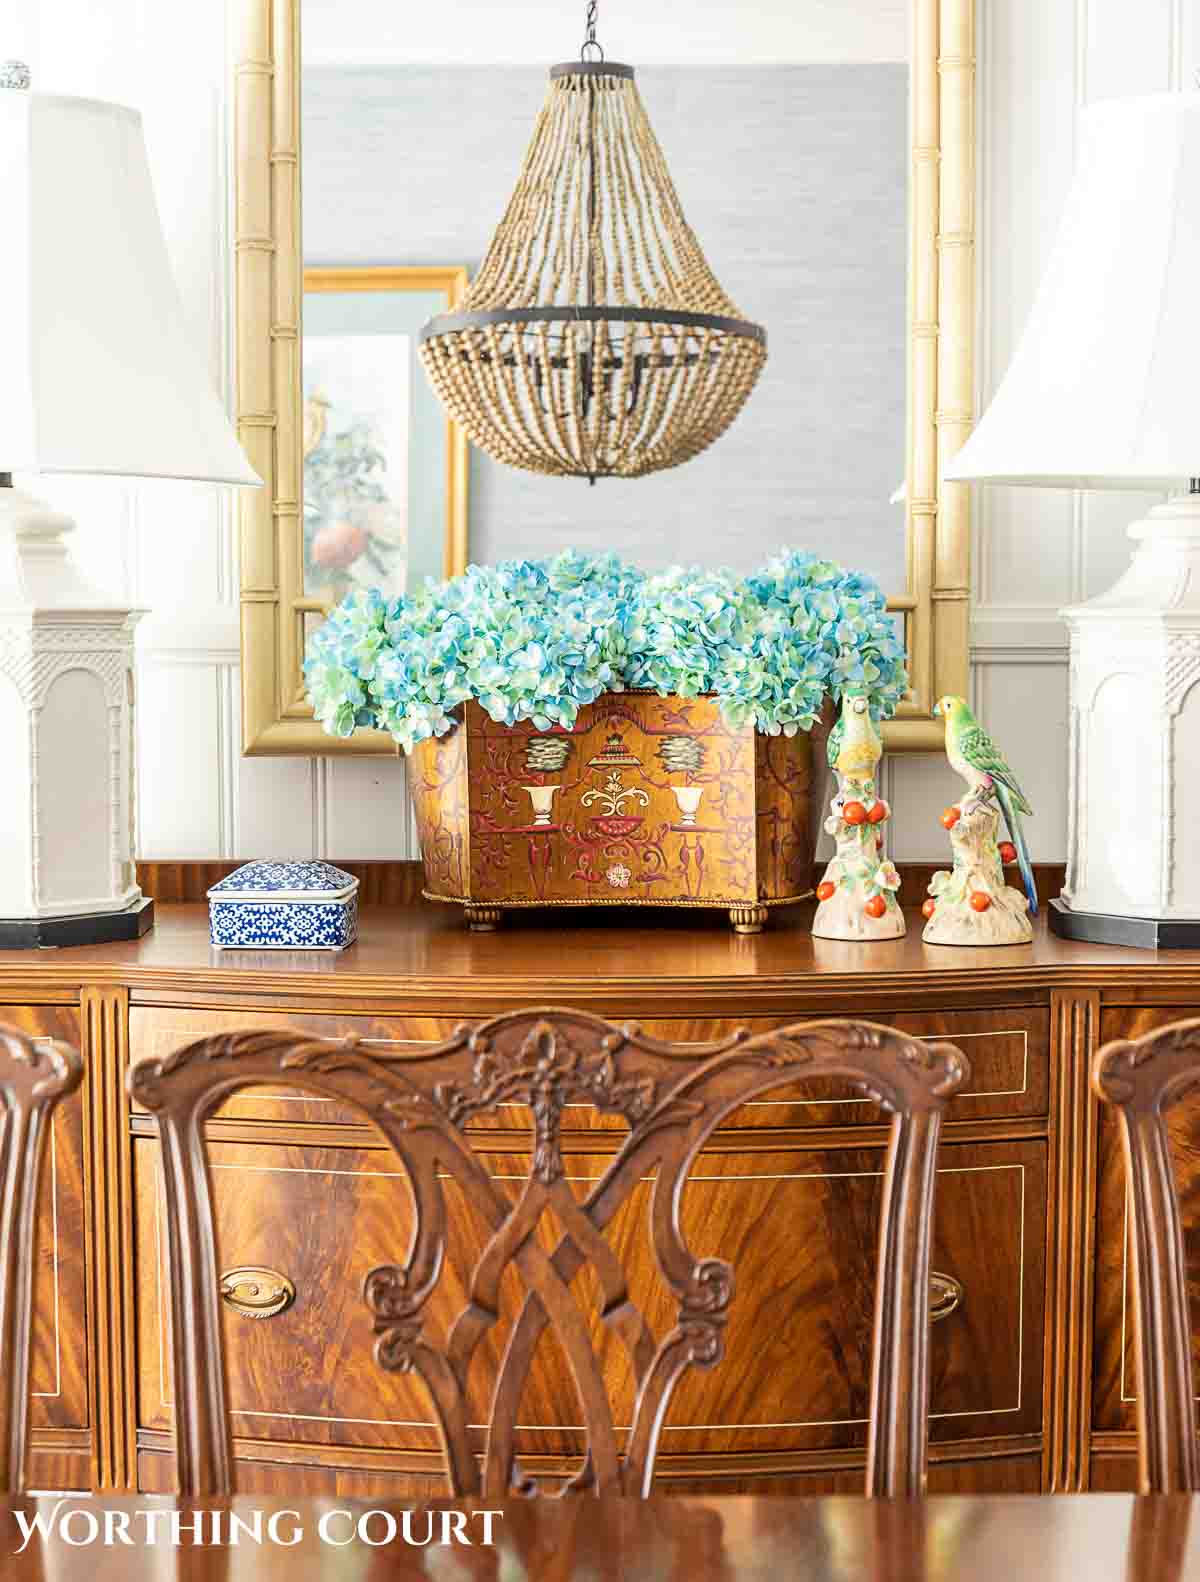 faux blue hydrangeas in an oblong container on a sideboard in front of a mirror flanked by white lamps